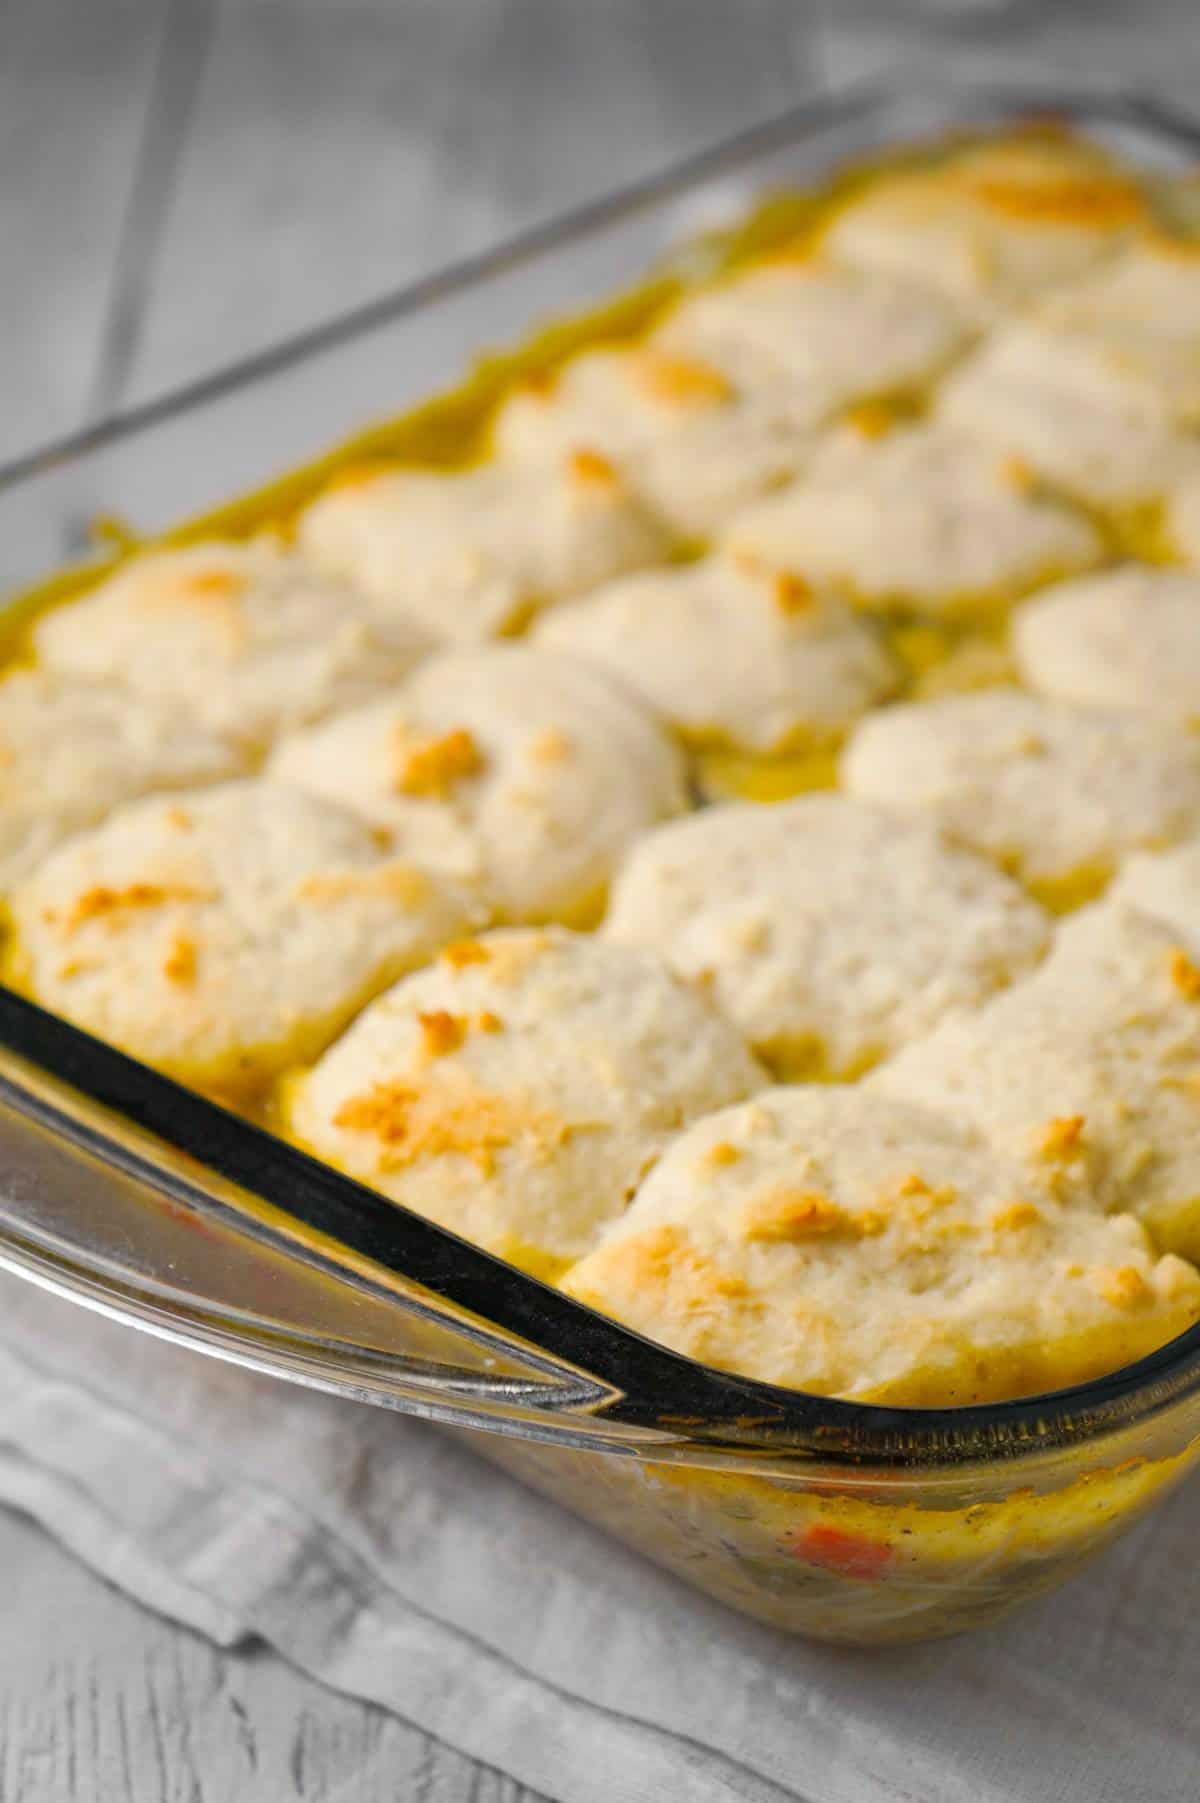 Chicken and Dumplings Casserole is an easy dinner recipe using shredded rotisserie chicken, cream of chicken soup, canned veggies and Bisquick.